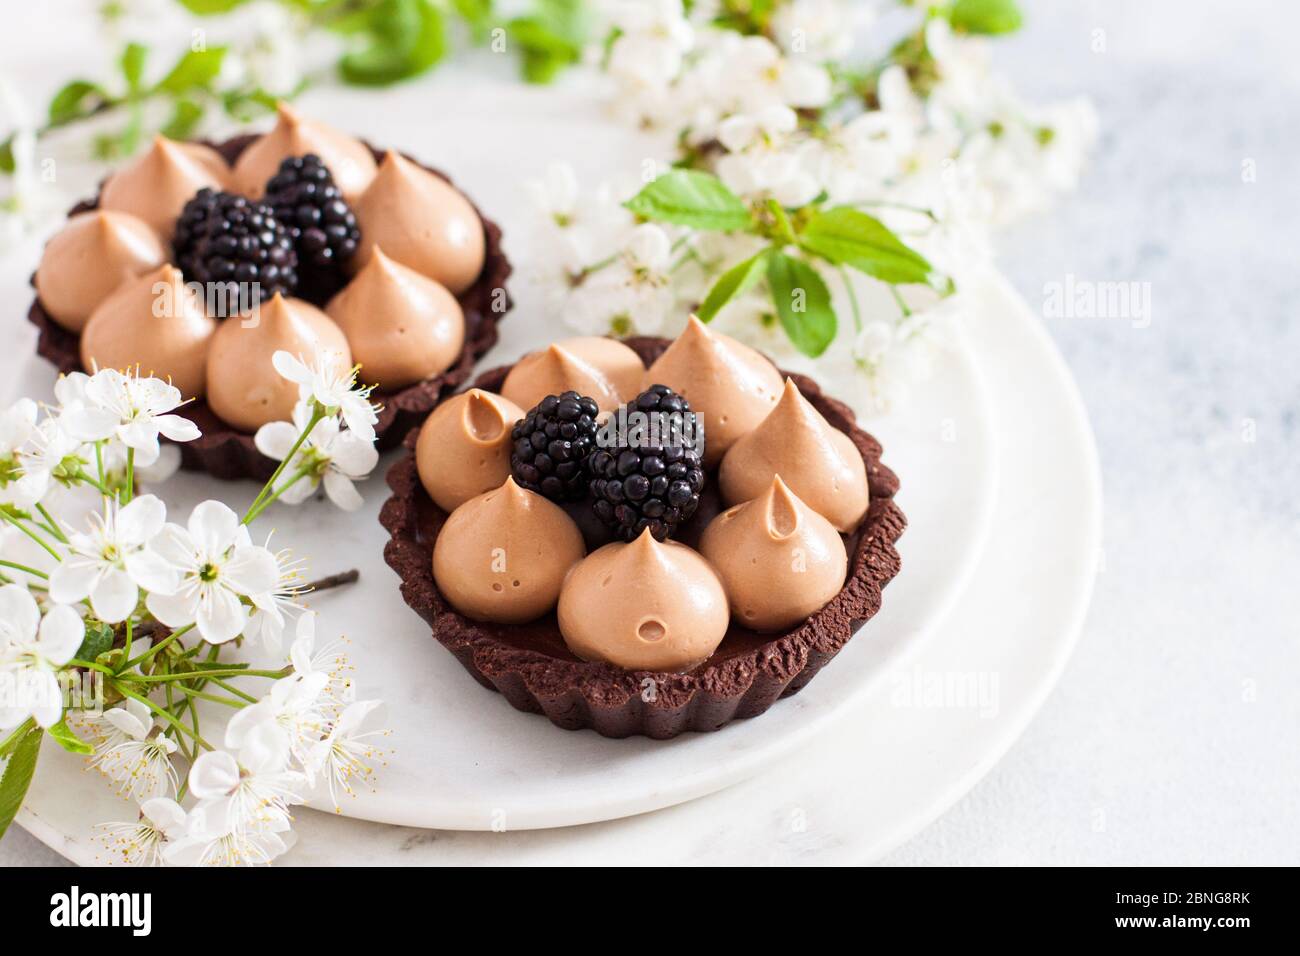 Chocolate tart with salted caramel filling and fresh blackberries. Cherry flowers on background. Copy space. Stock Photo